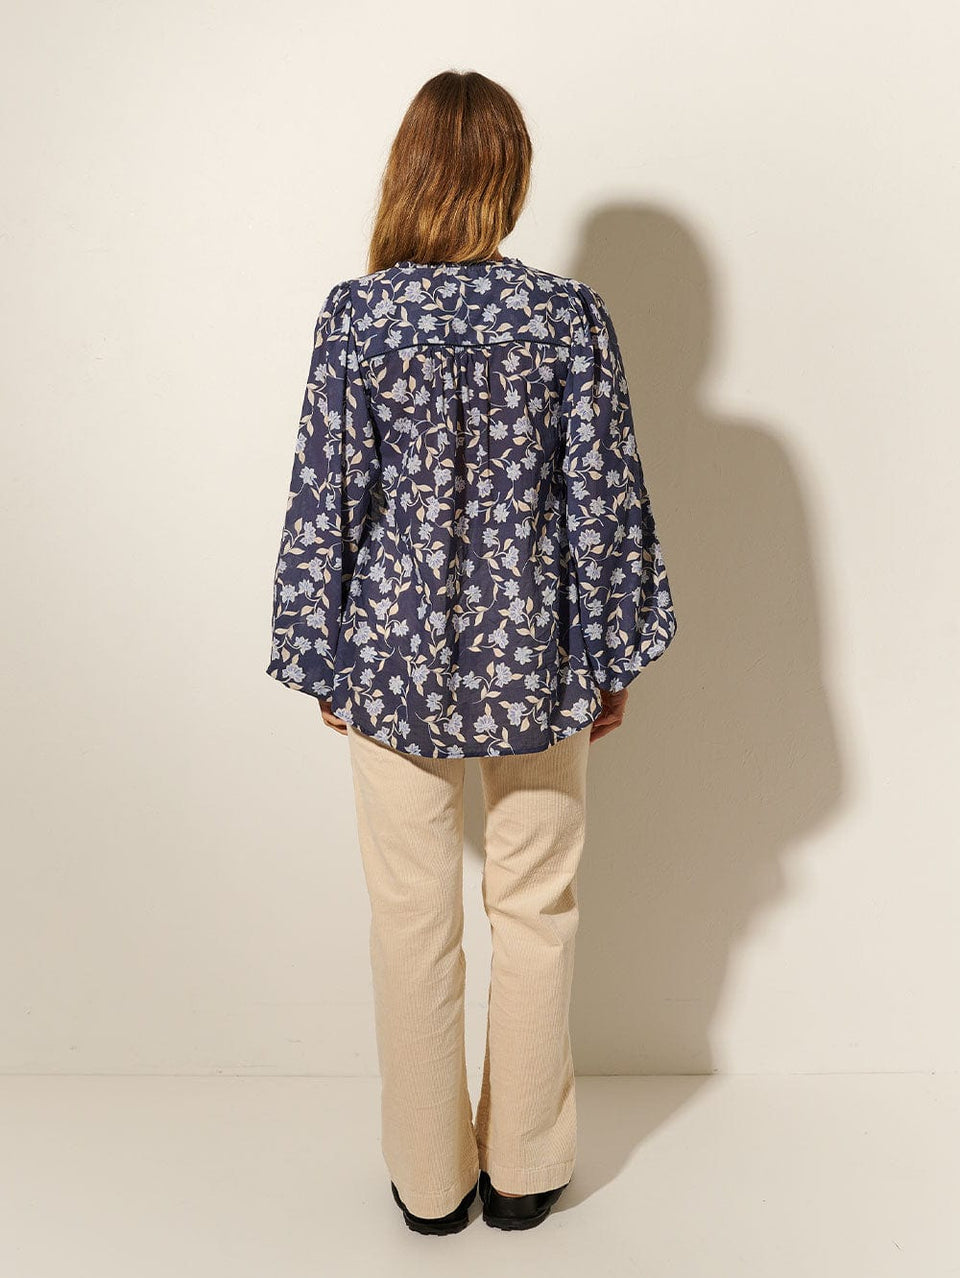 Back shot: Studio model wears KIVARI Jeanne Blouse: A navy and sky blue floral blouse made from cotton and featuring a button front, full-length blouson sleeves and frill collar detail.